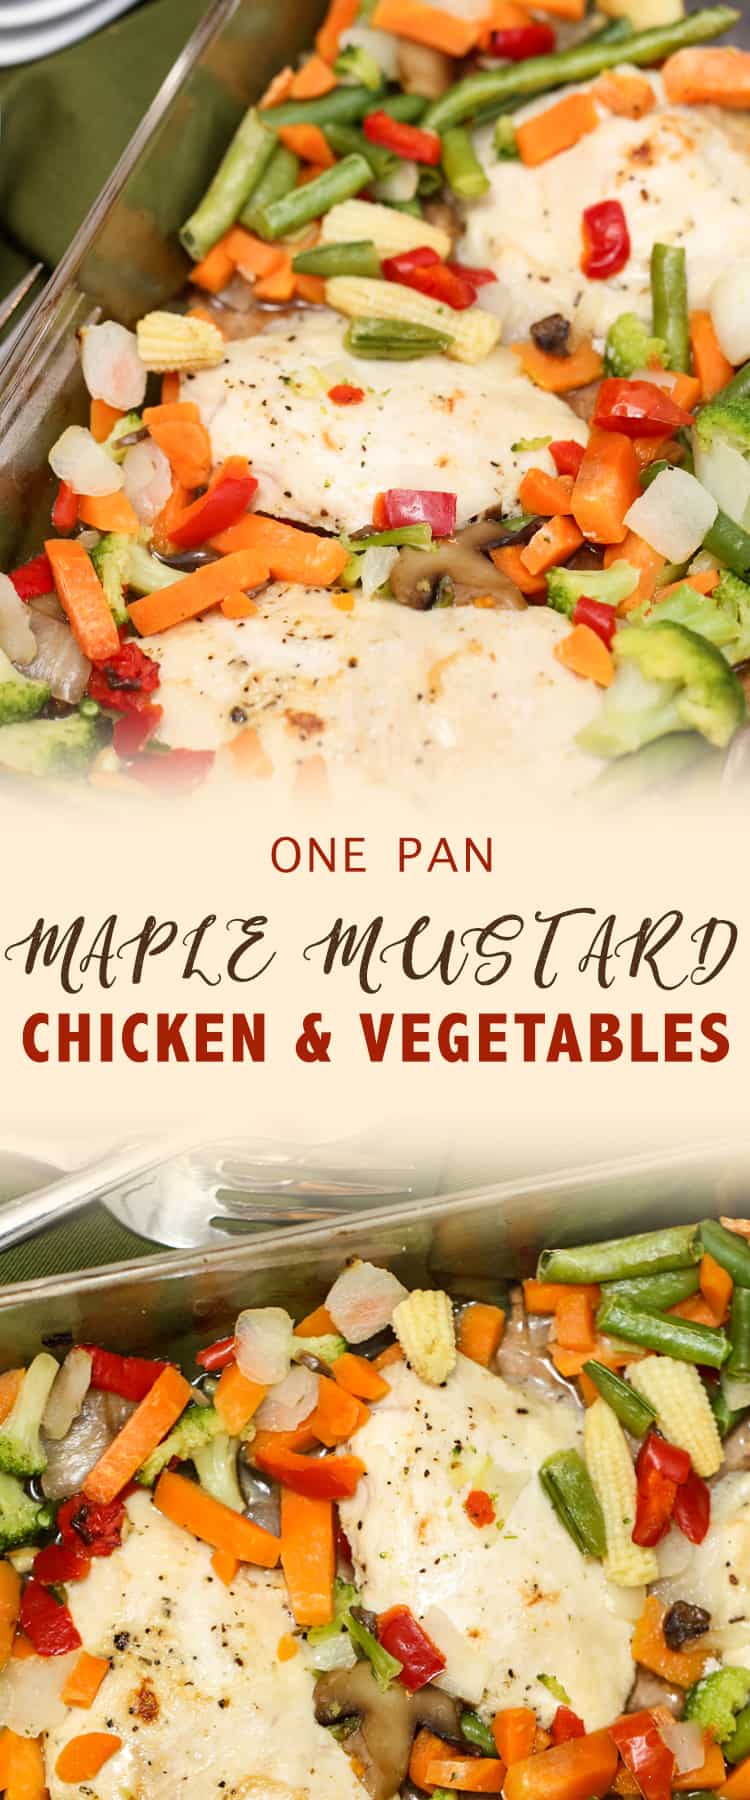 One Pan Maple Mustard Chicken and Vegetables is a marinated chicken breast recipe using two key ingredients: dry mustard and maple syrup. It's a nice flavour combination! The mixed vegetables sides are roasted along with the chicken, making it a one-dish meal. 